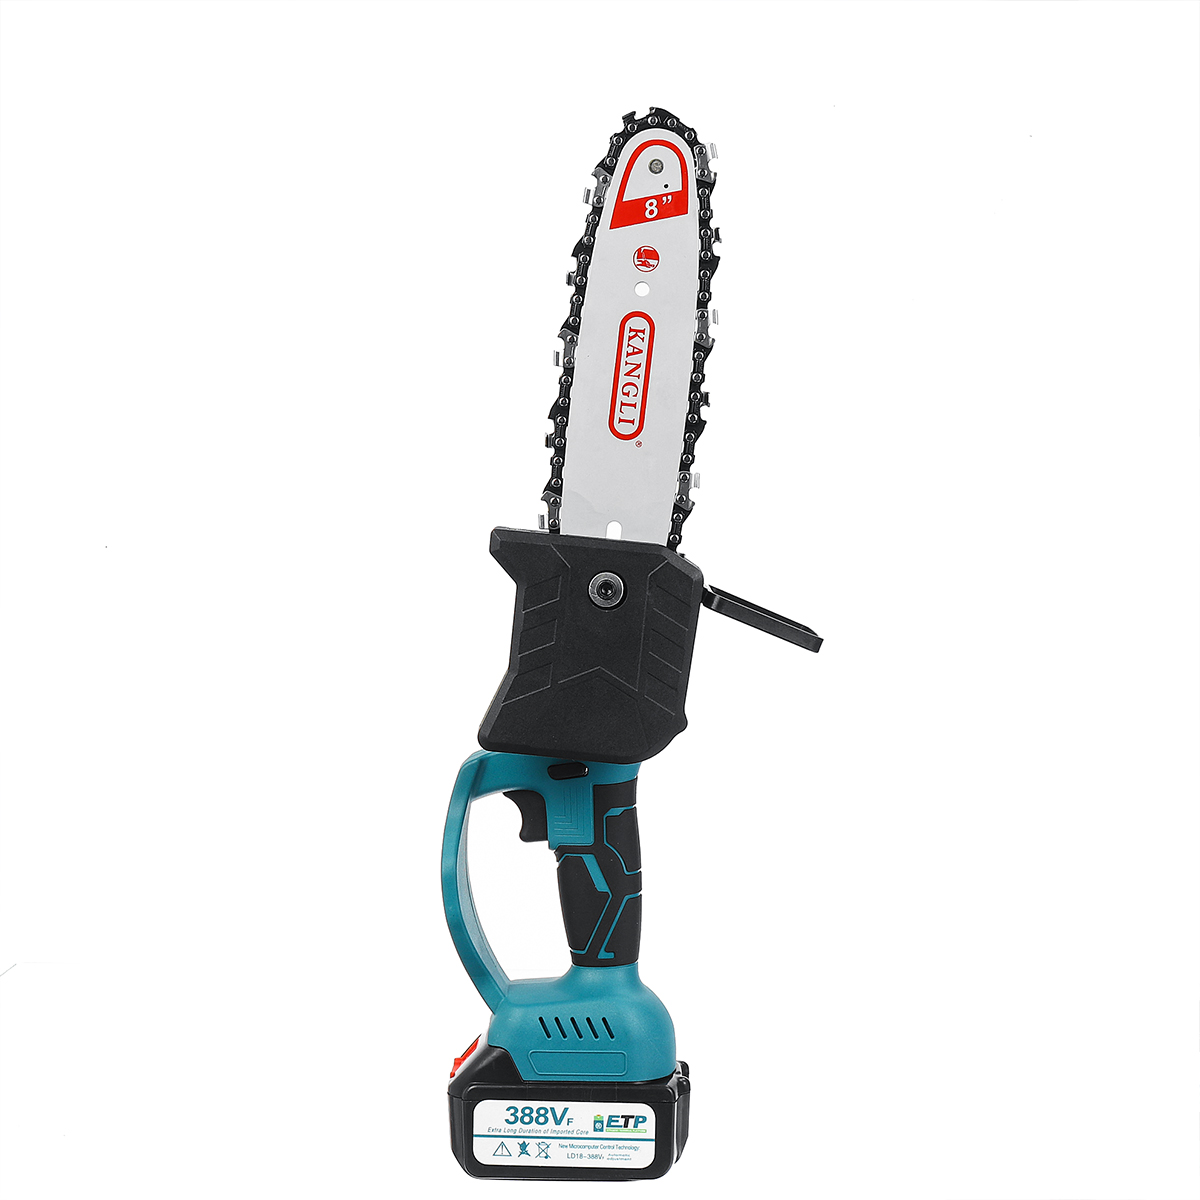 1500W-8inch-Cordless-Electric-Chain-Saw-Brushless-Motor-Power-Tools-Rechargeable-Lithium-Battery-1805588-7